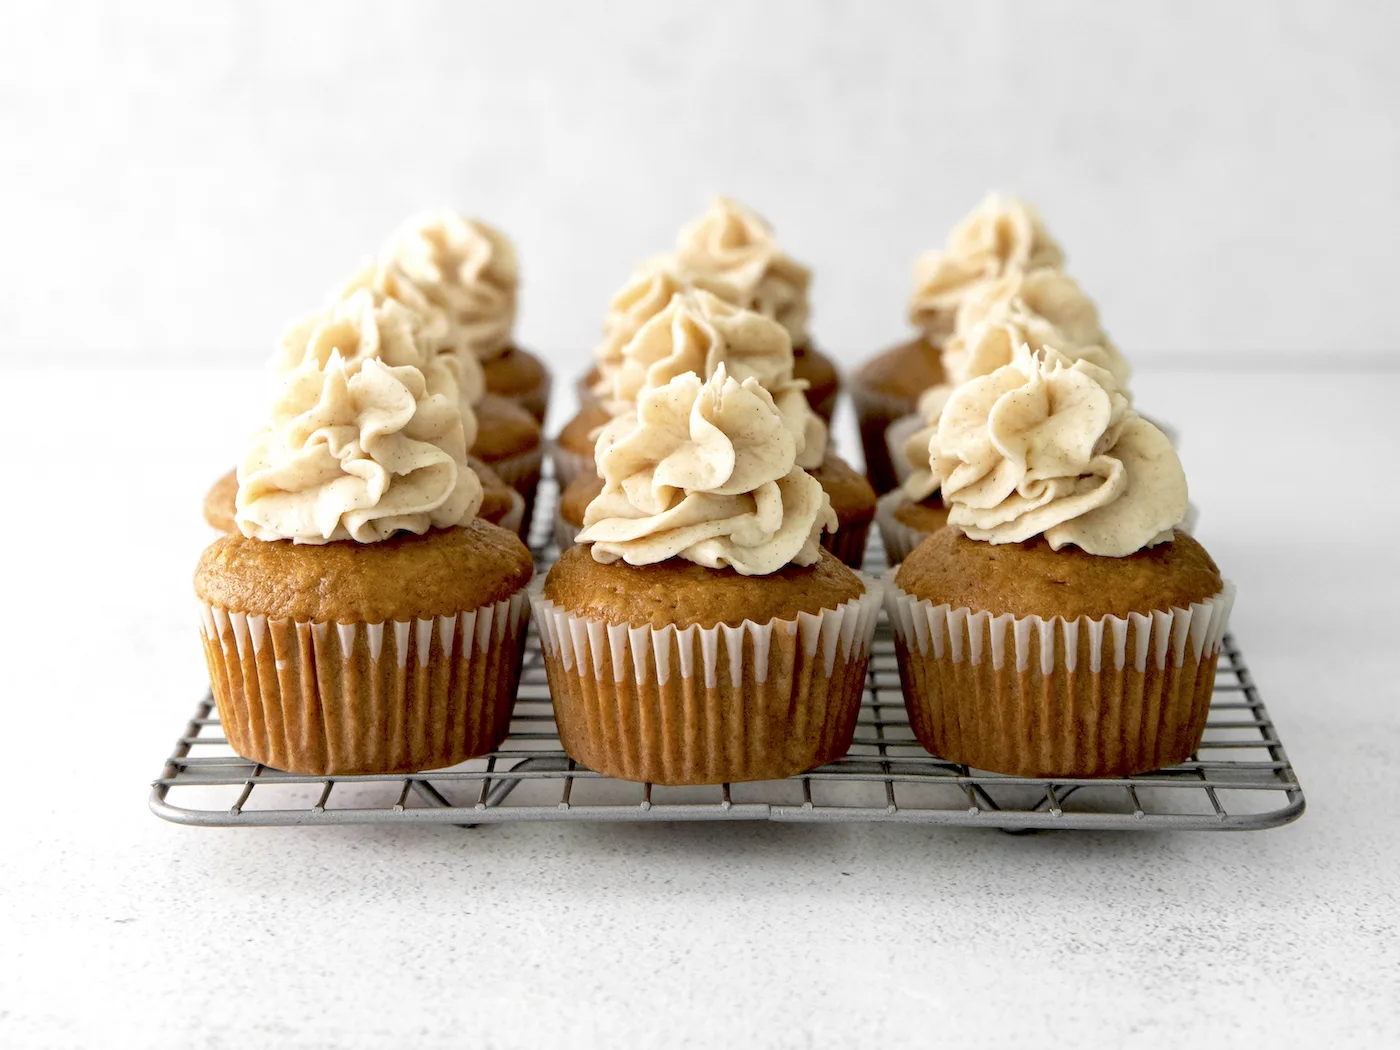 Gingerbread Cupcakes with Spiced White Chocolate Buttercream